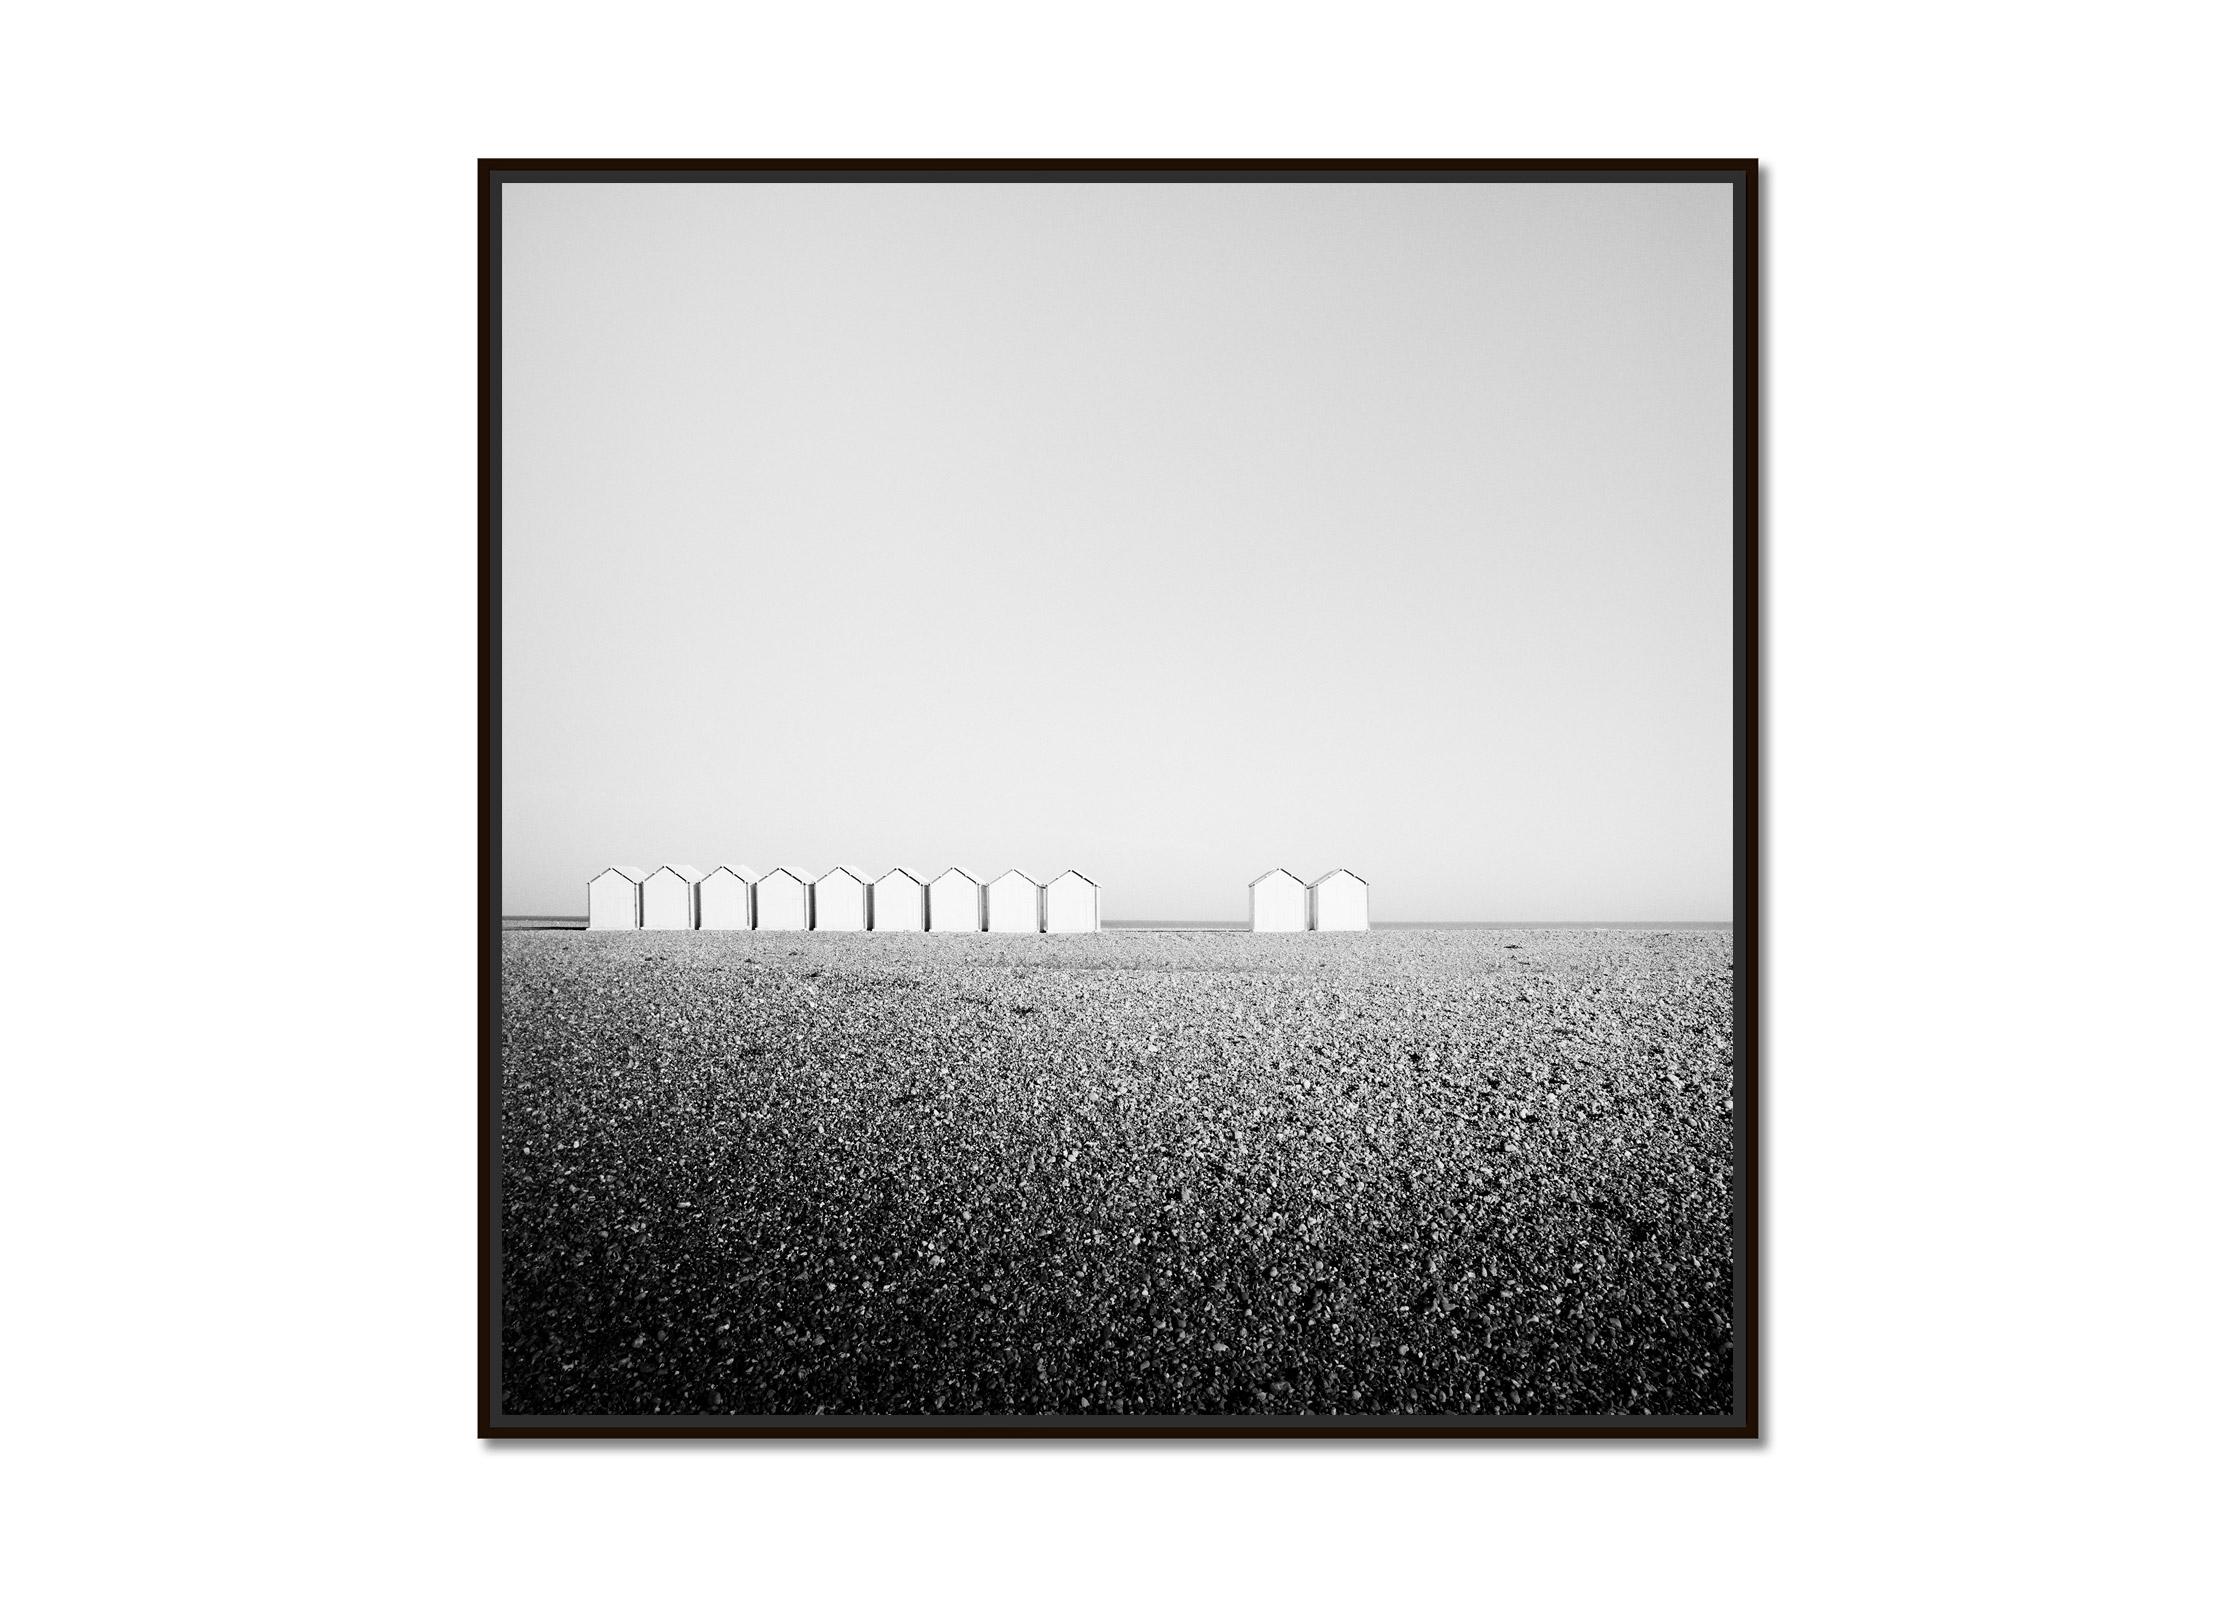 Eleven Huts, rocky beach, France, black and white fine art photography landscape - Photograph by Gerald Berghammer